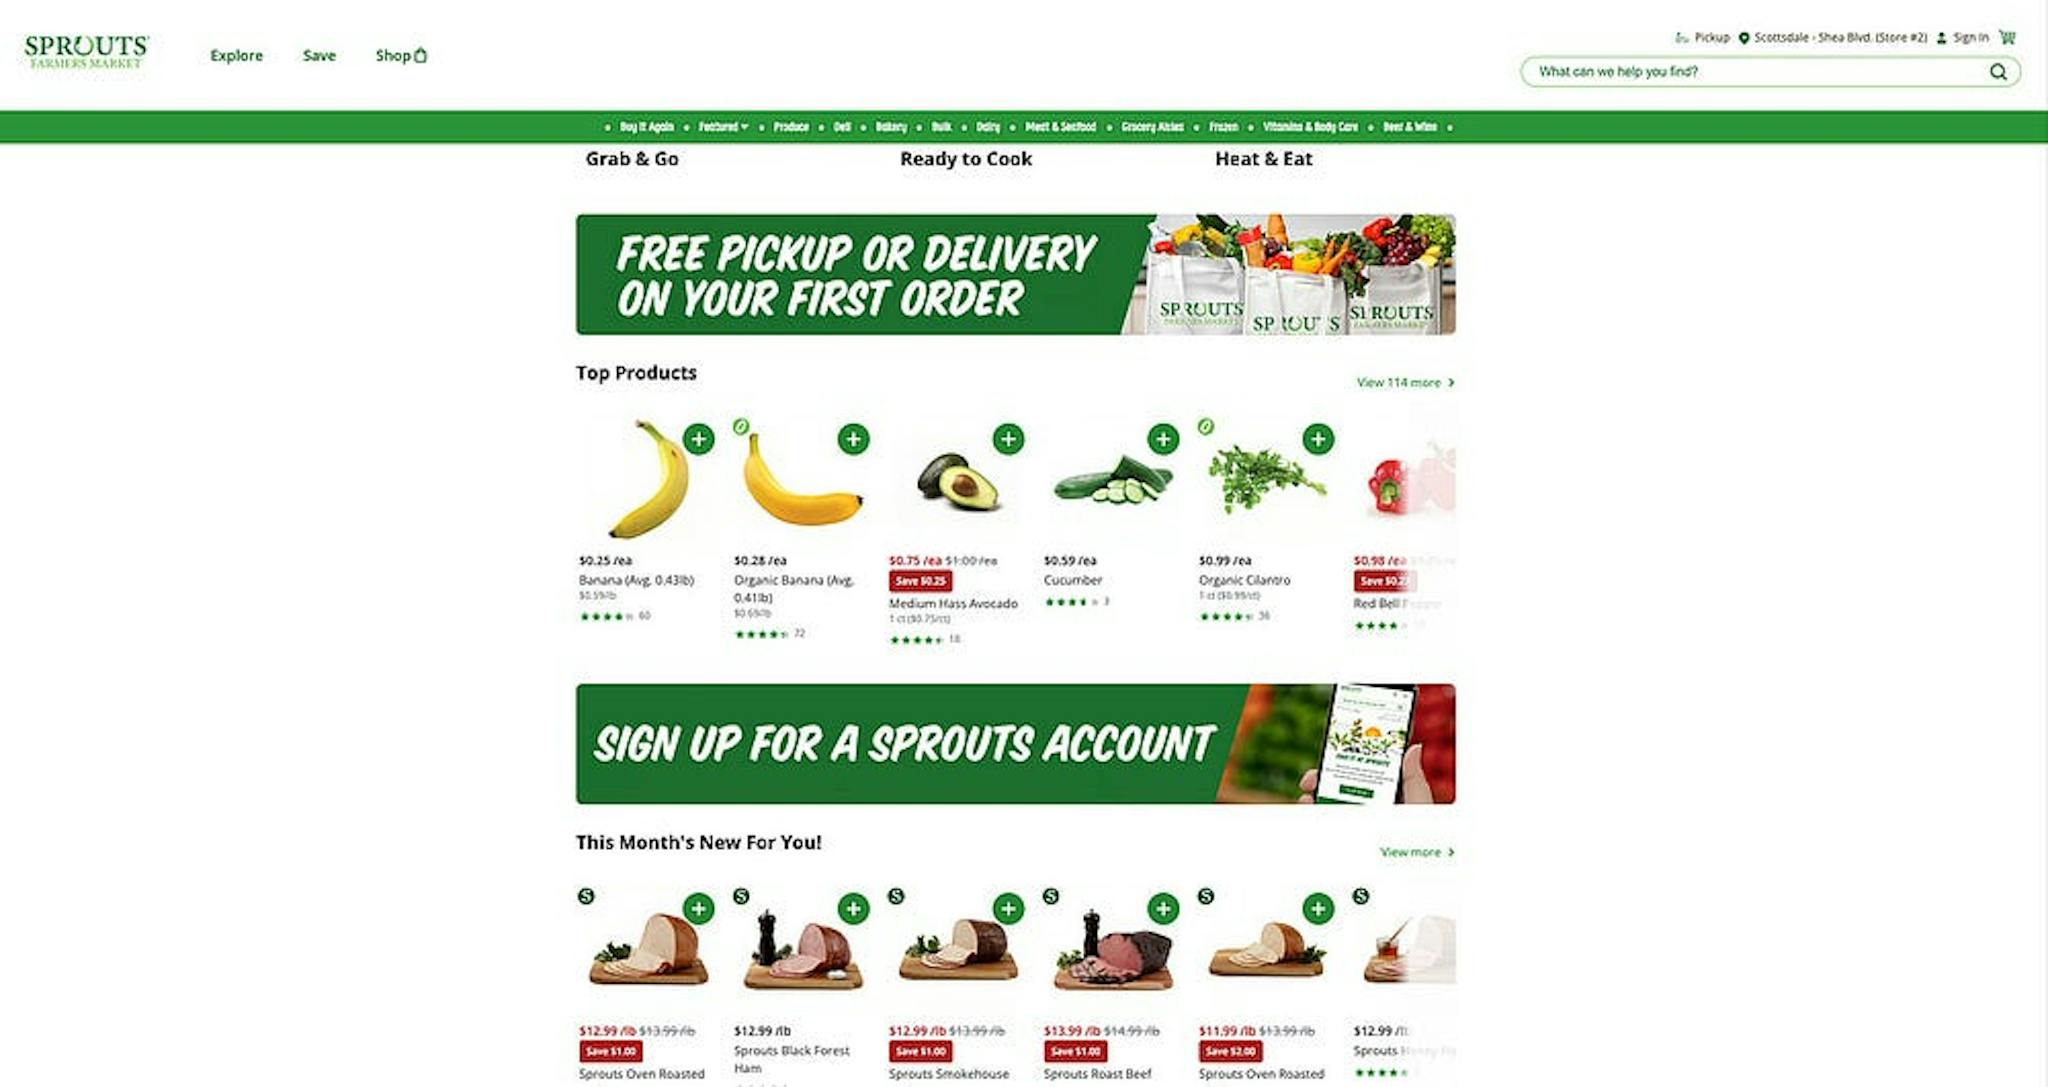 Sprouts Market storefront powered by Instacart; Source: author